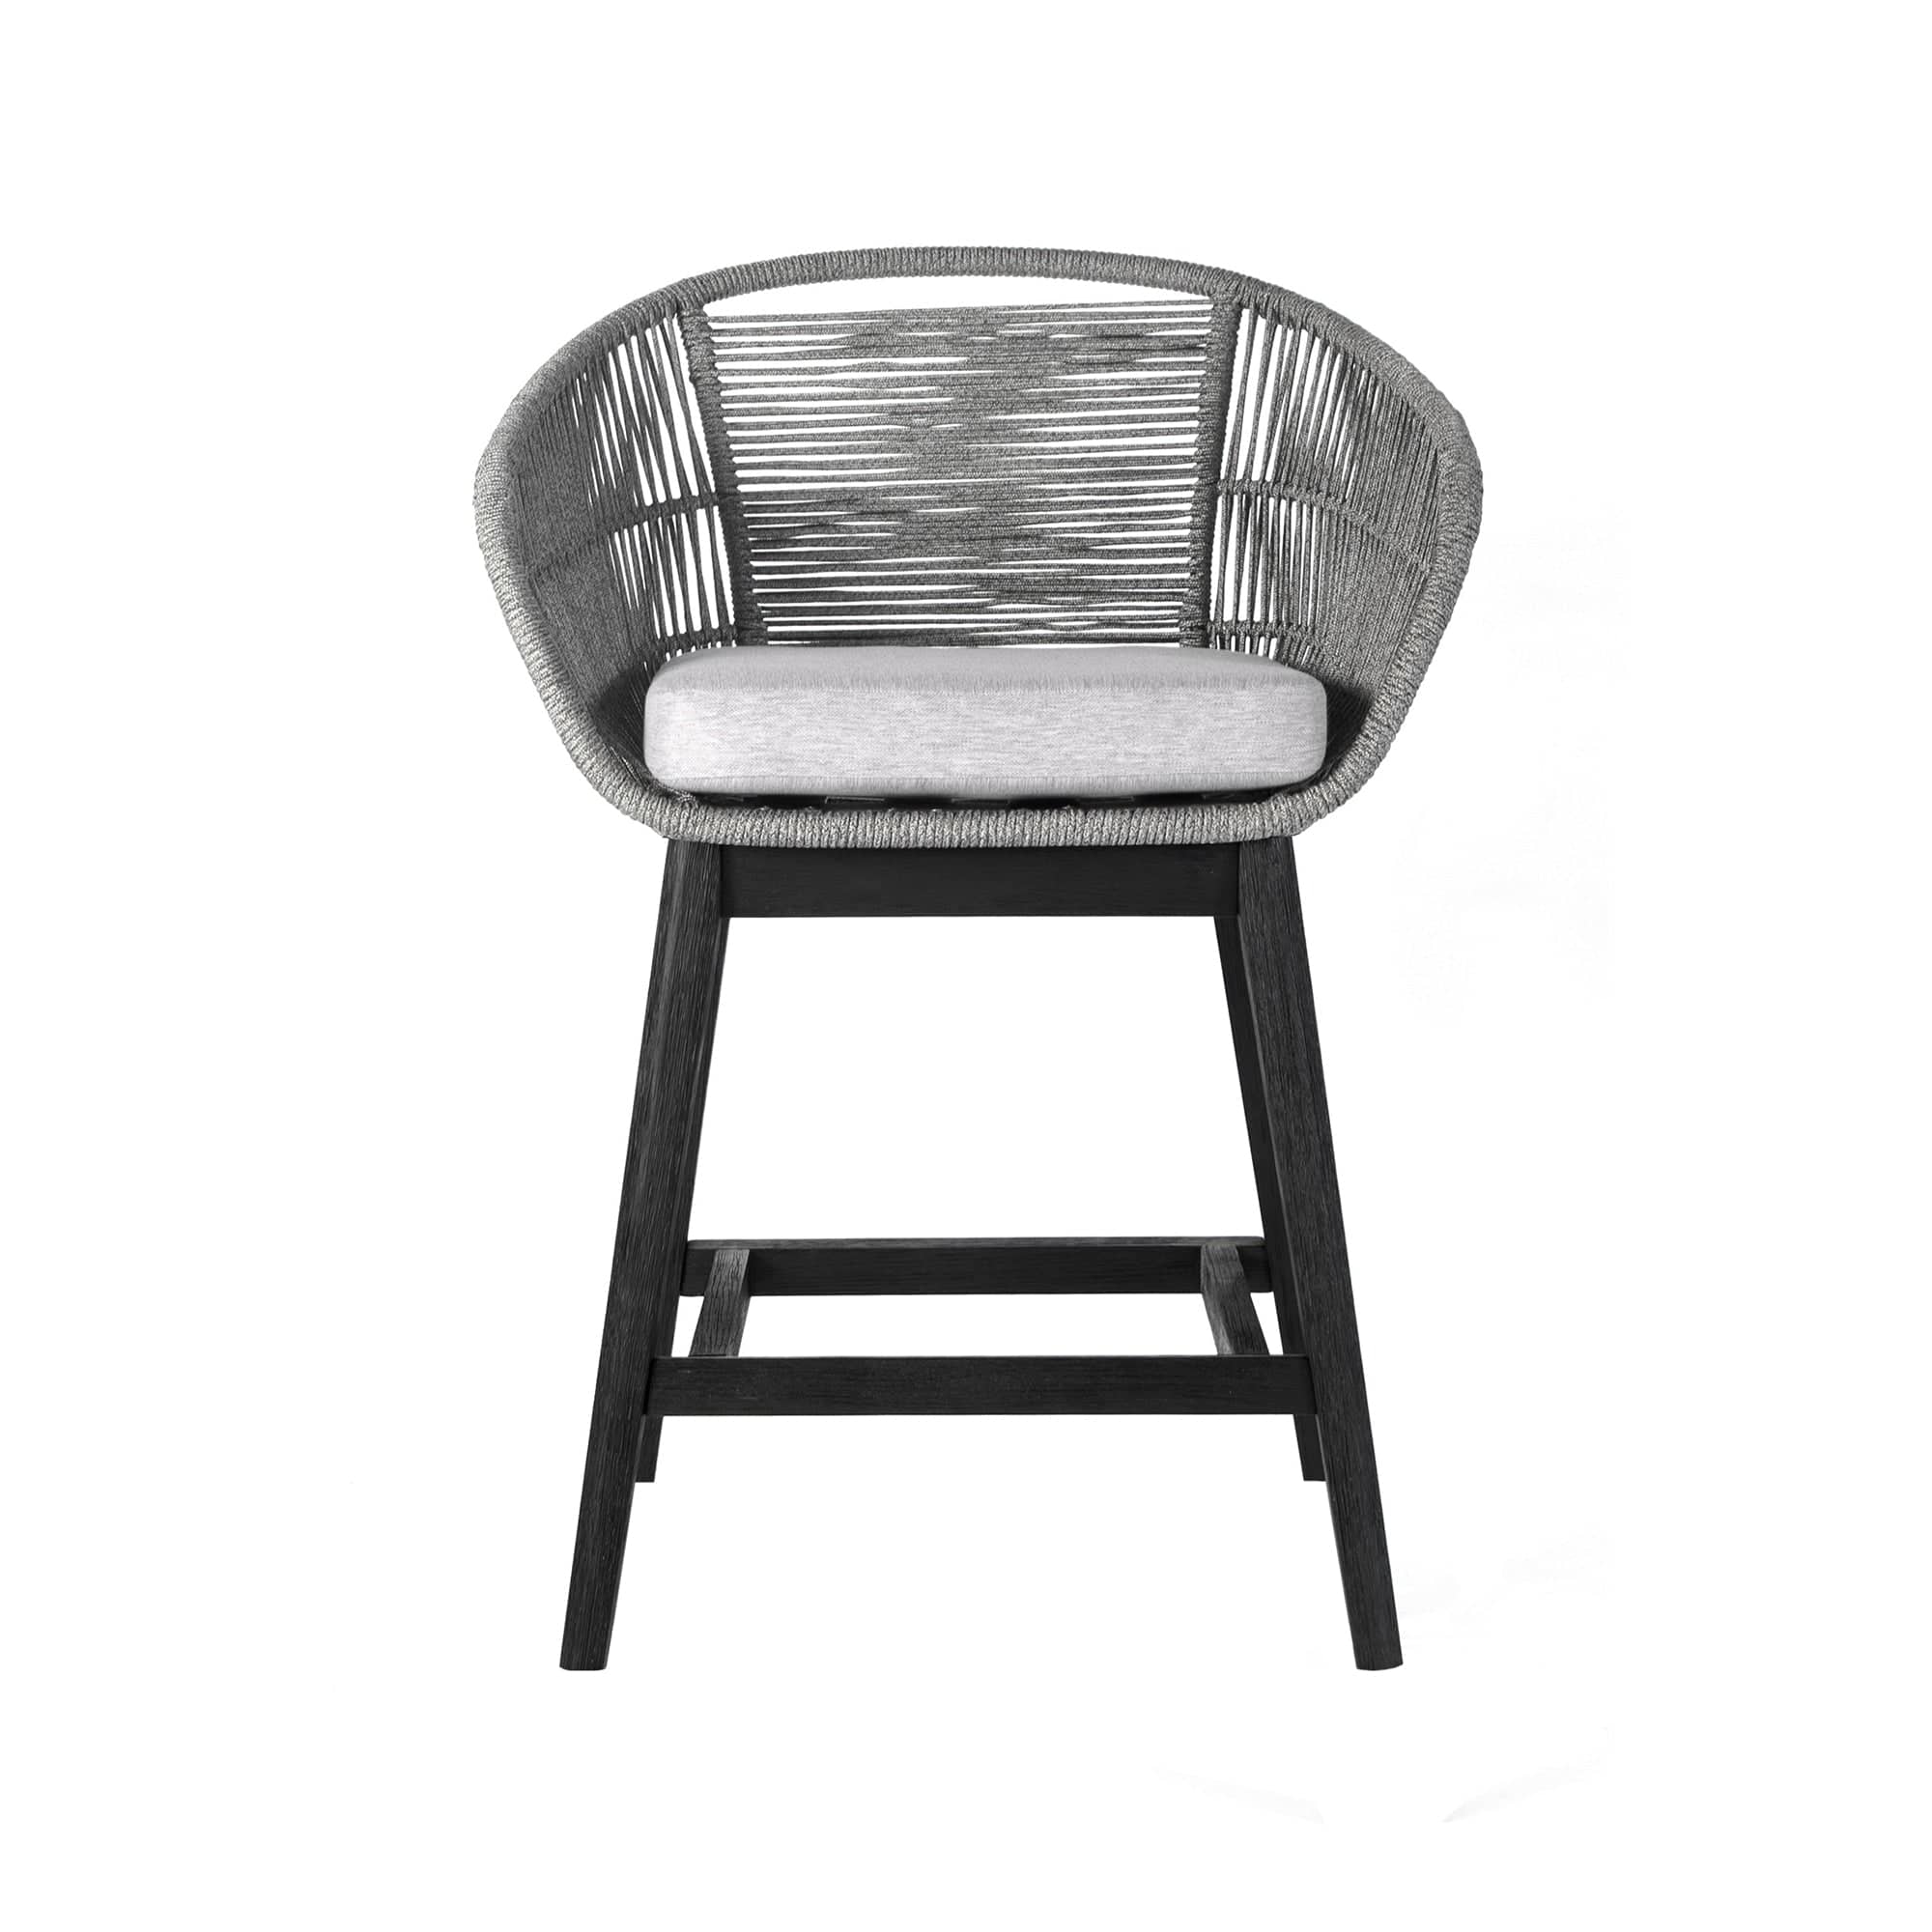 Armen Living Outdoor Bar Stool Armen Living | Tutti Frutti Indoor Outdoor Counter Height Bar Stool in Black Brushed Wood with Grey Rope | LCTFBAGRBL26